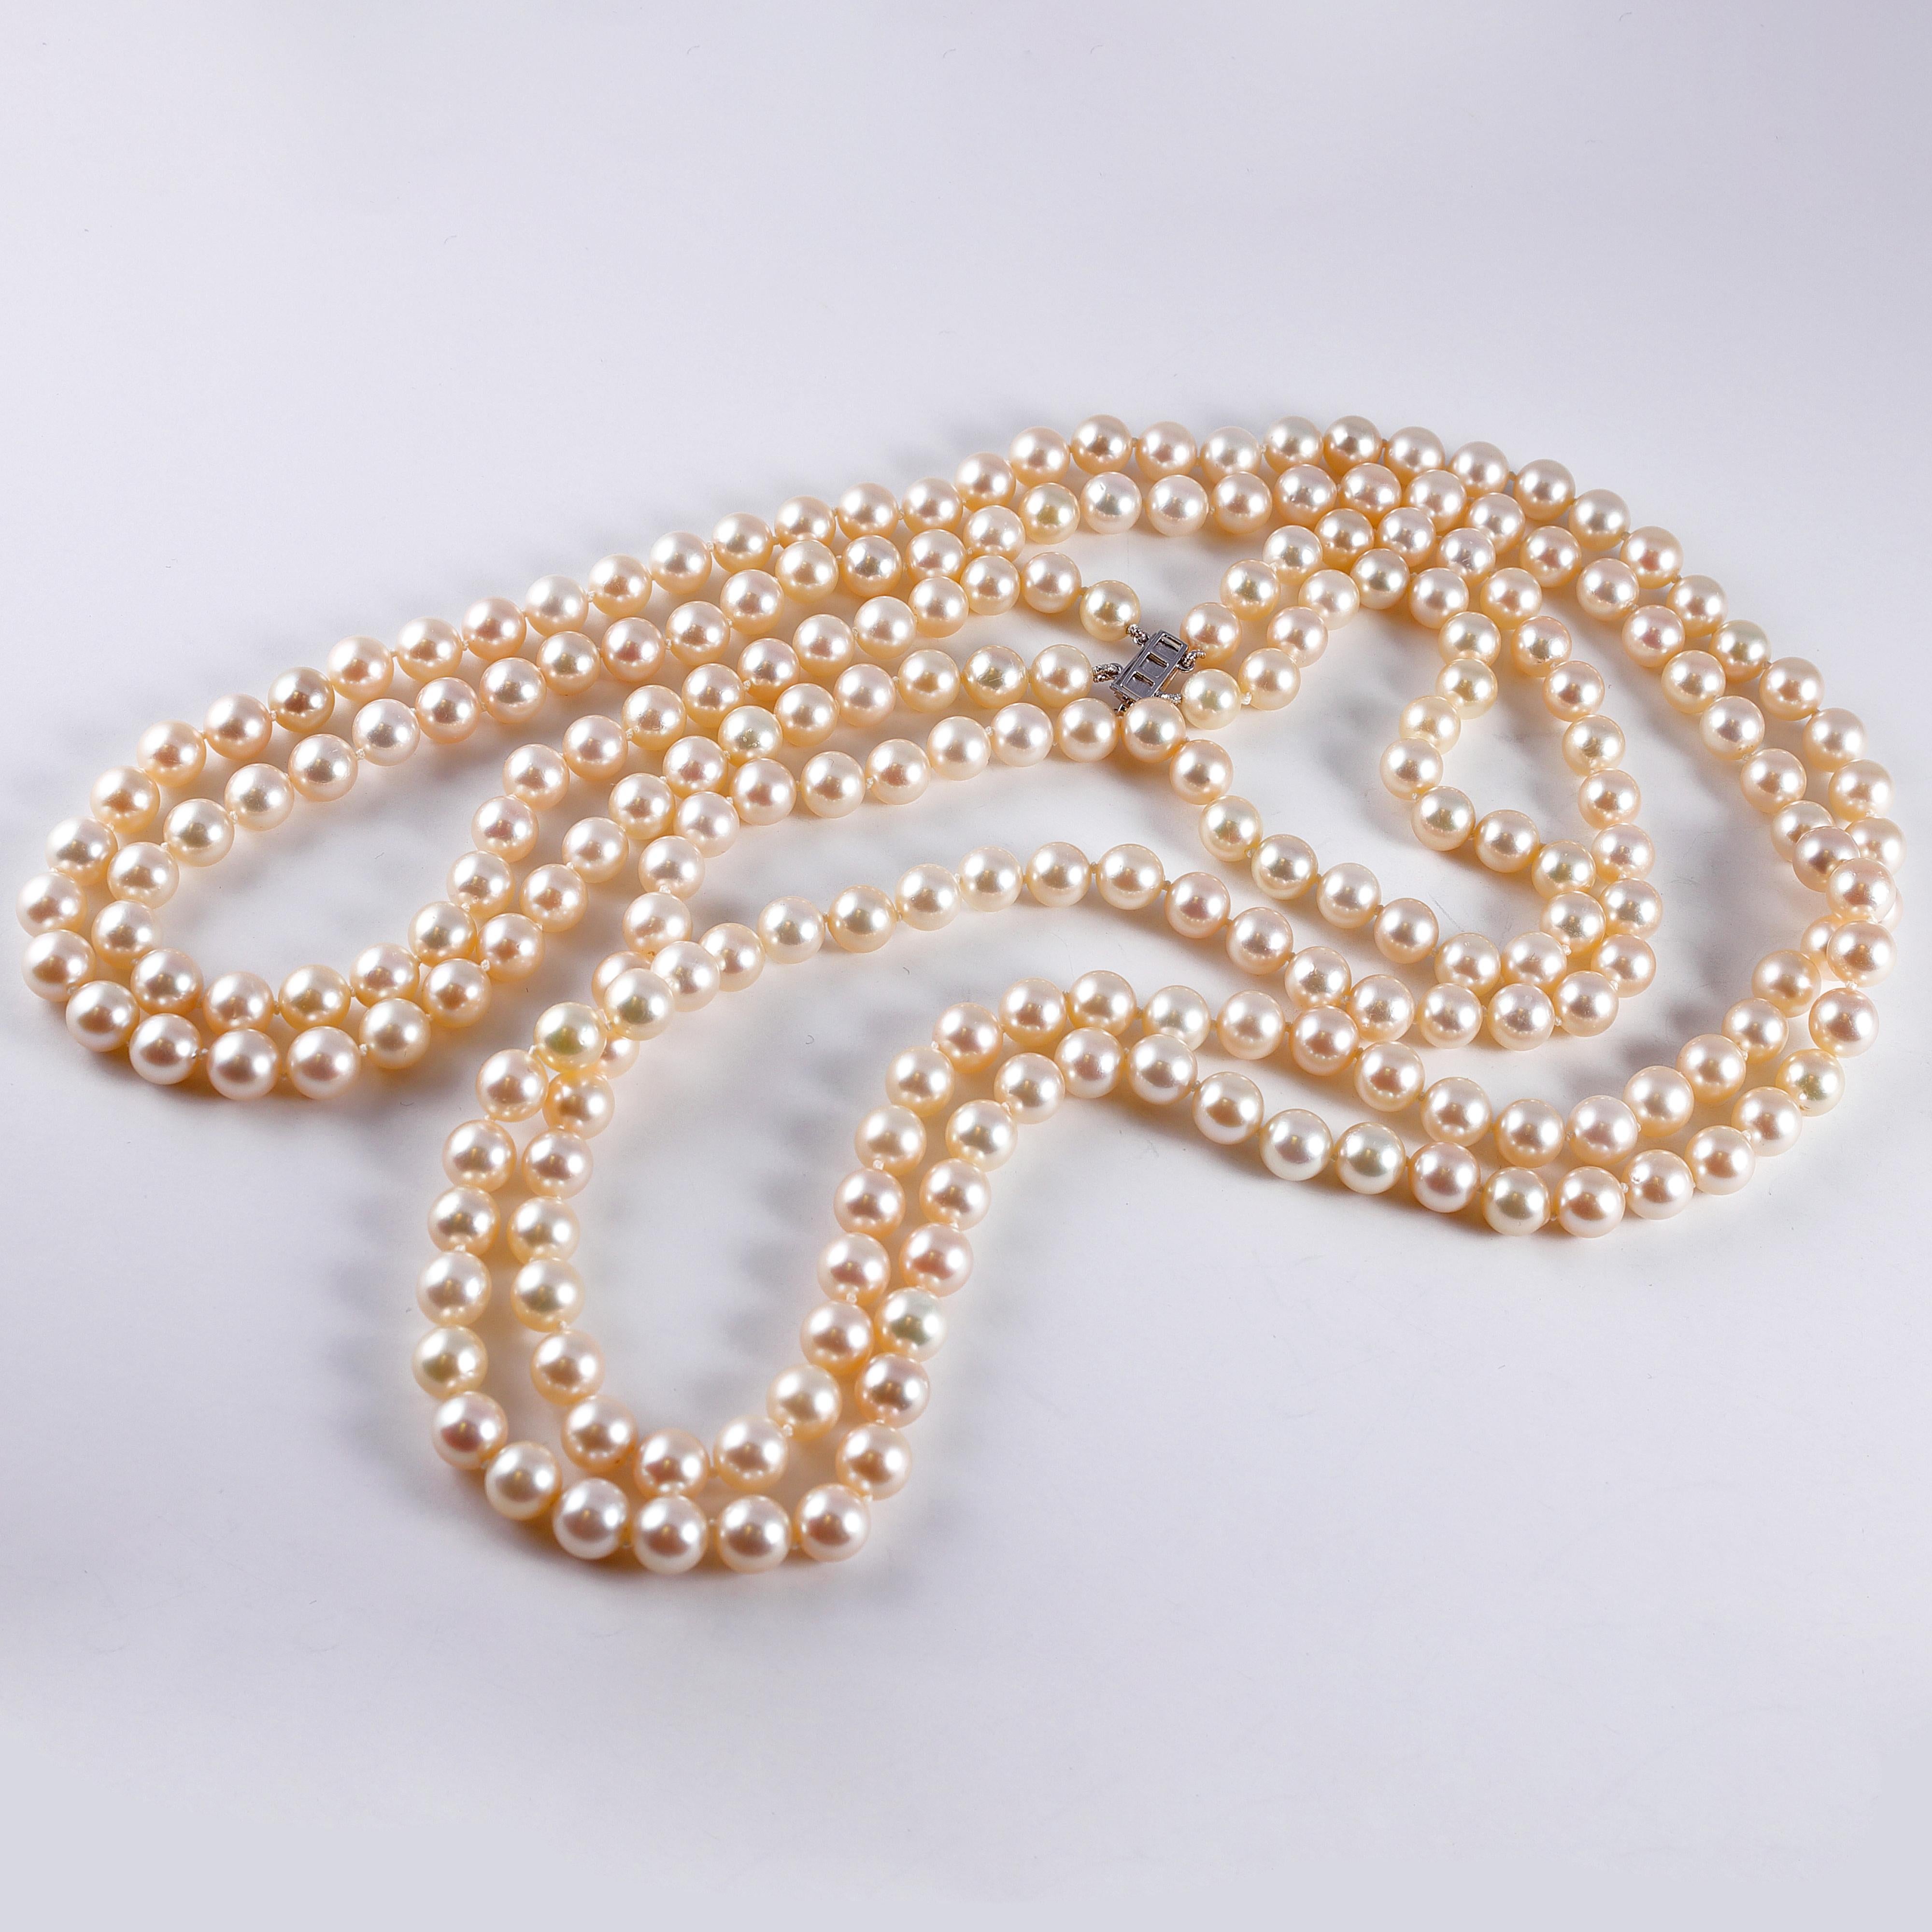 Women's or Men's Cultured Pearl Long Necklace Diamond Clasp